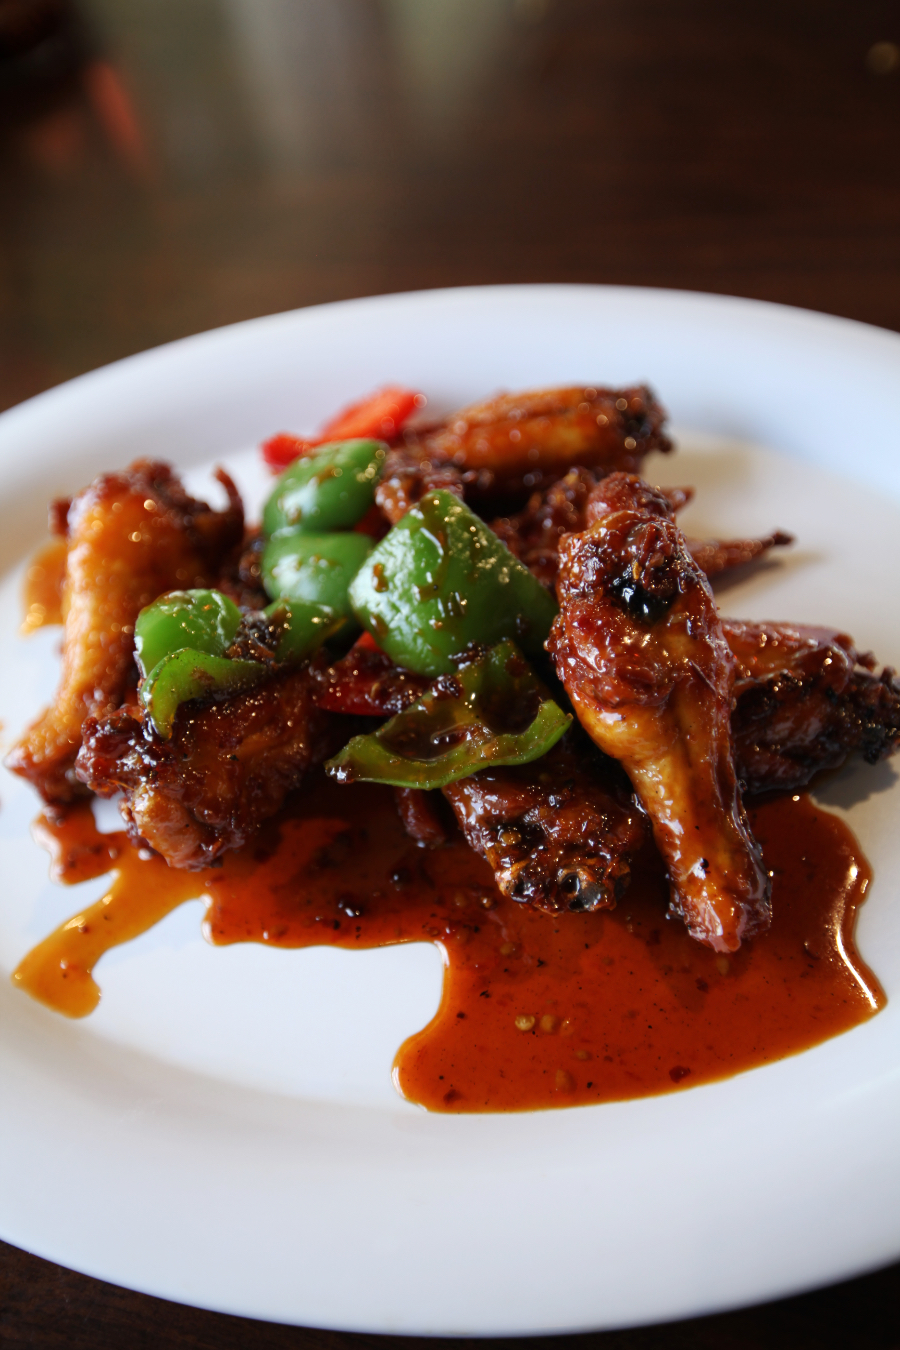 A photo of an order of chicken wings sitting on a plate